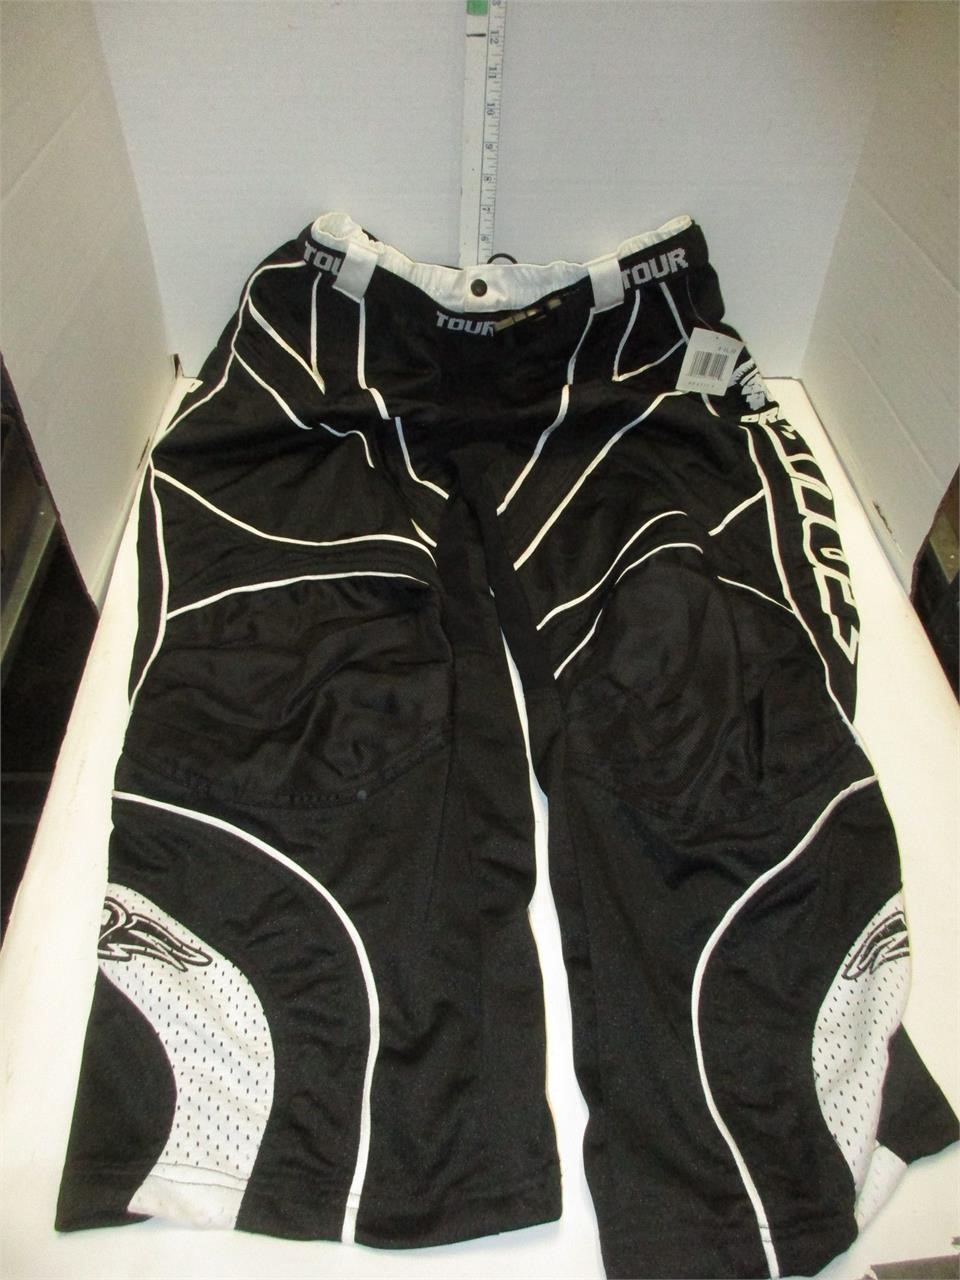 $Deal TOUR Inline Pants - Adult Small